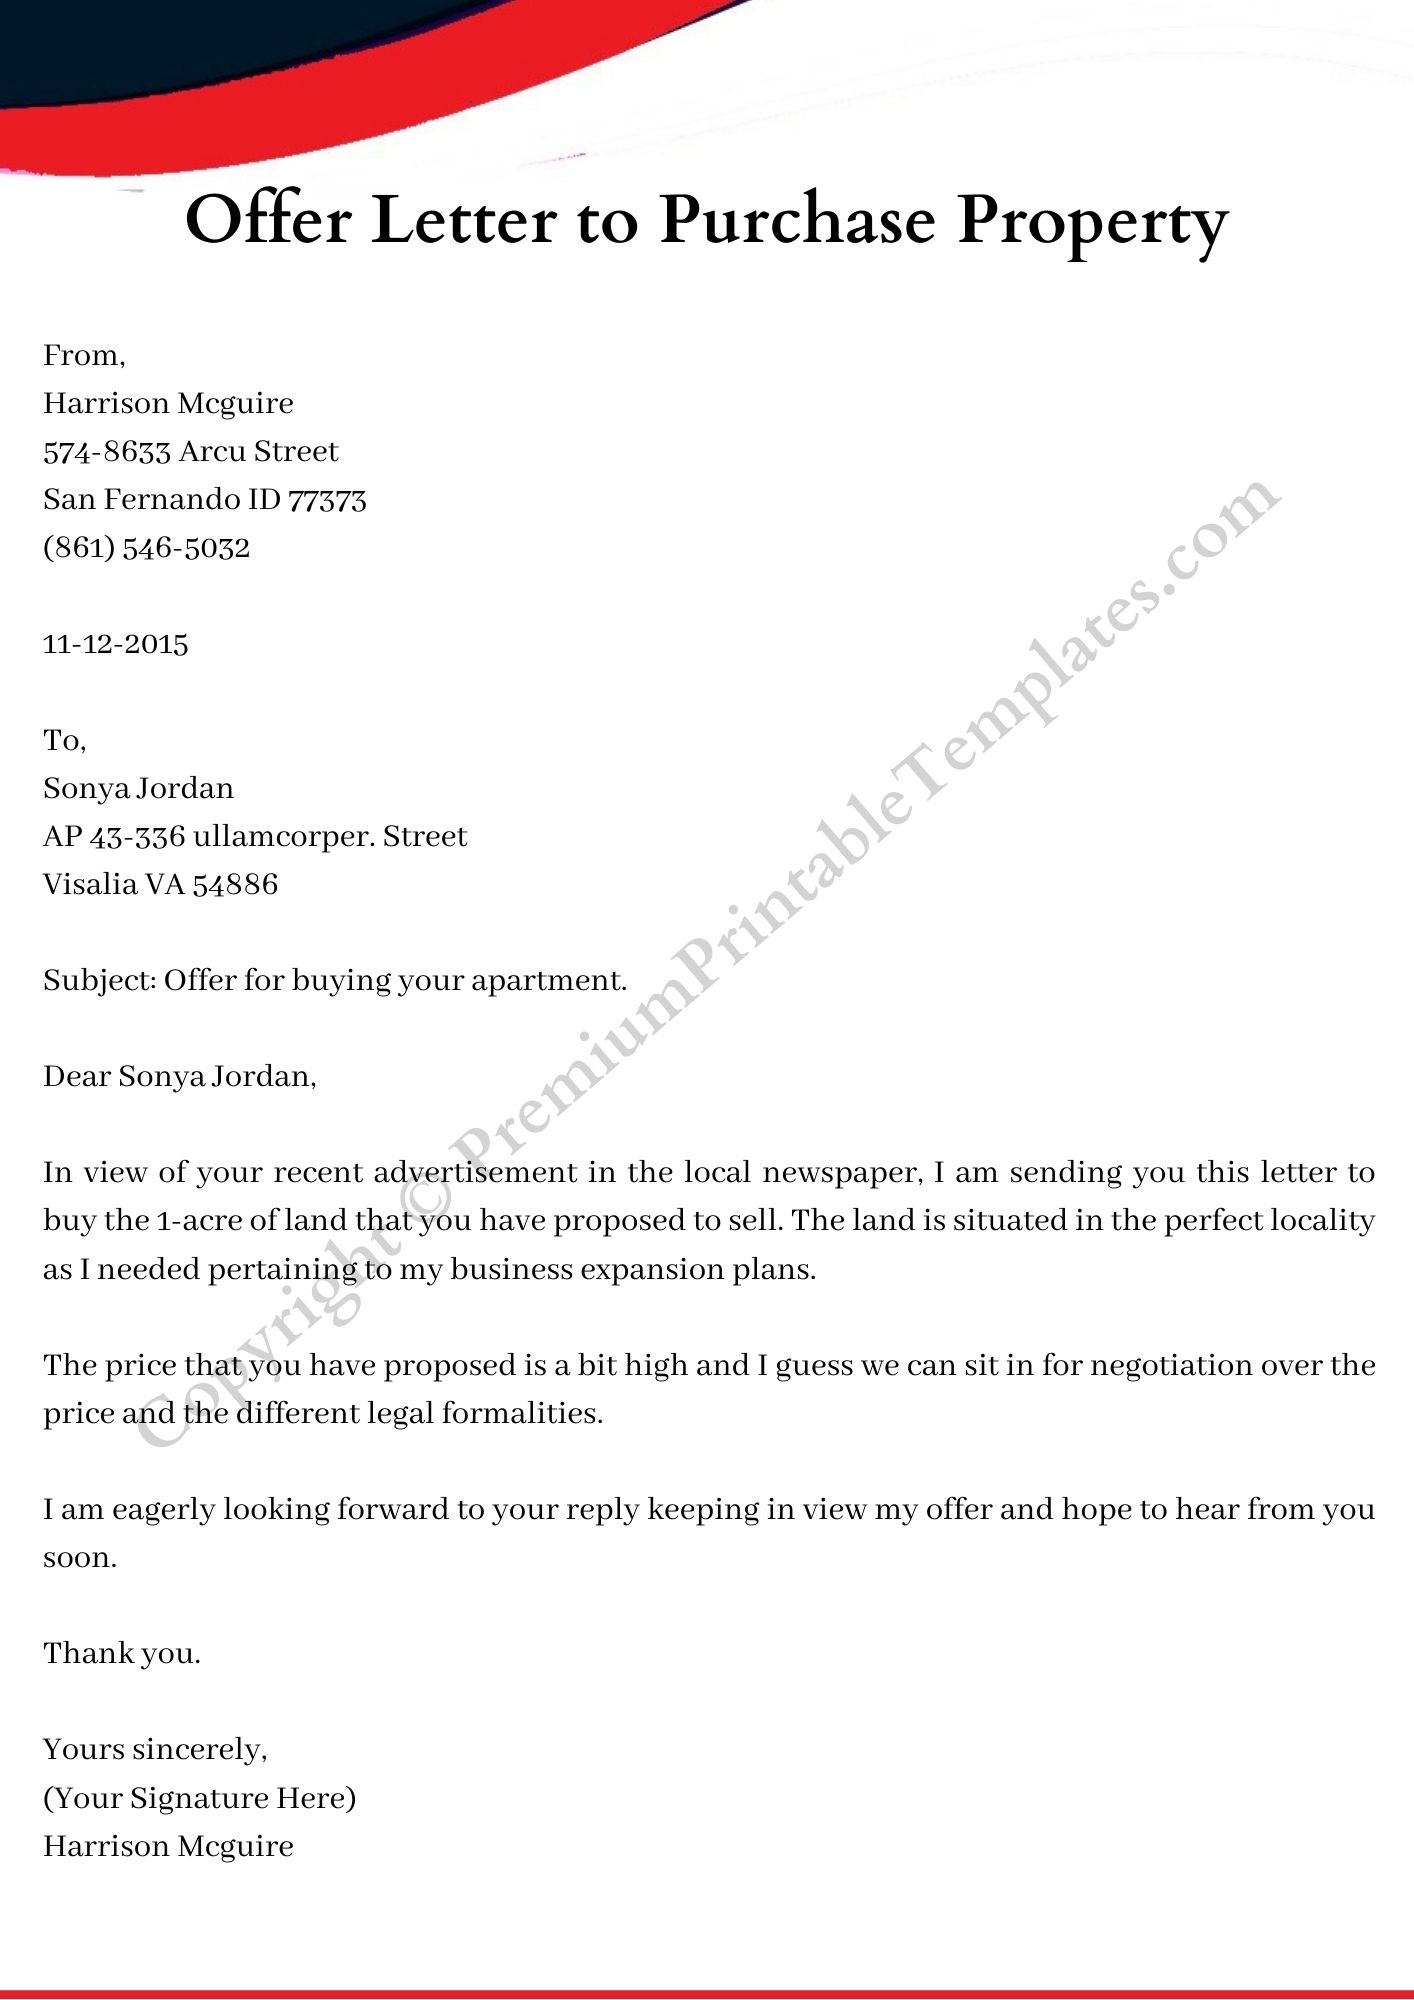 Offer Letter to Purchase Property Printable in PDF and Word